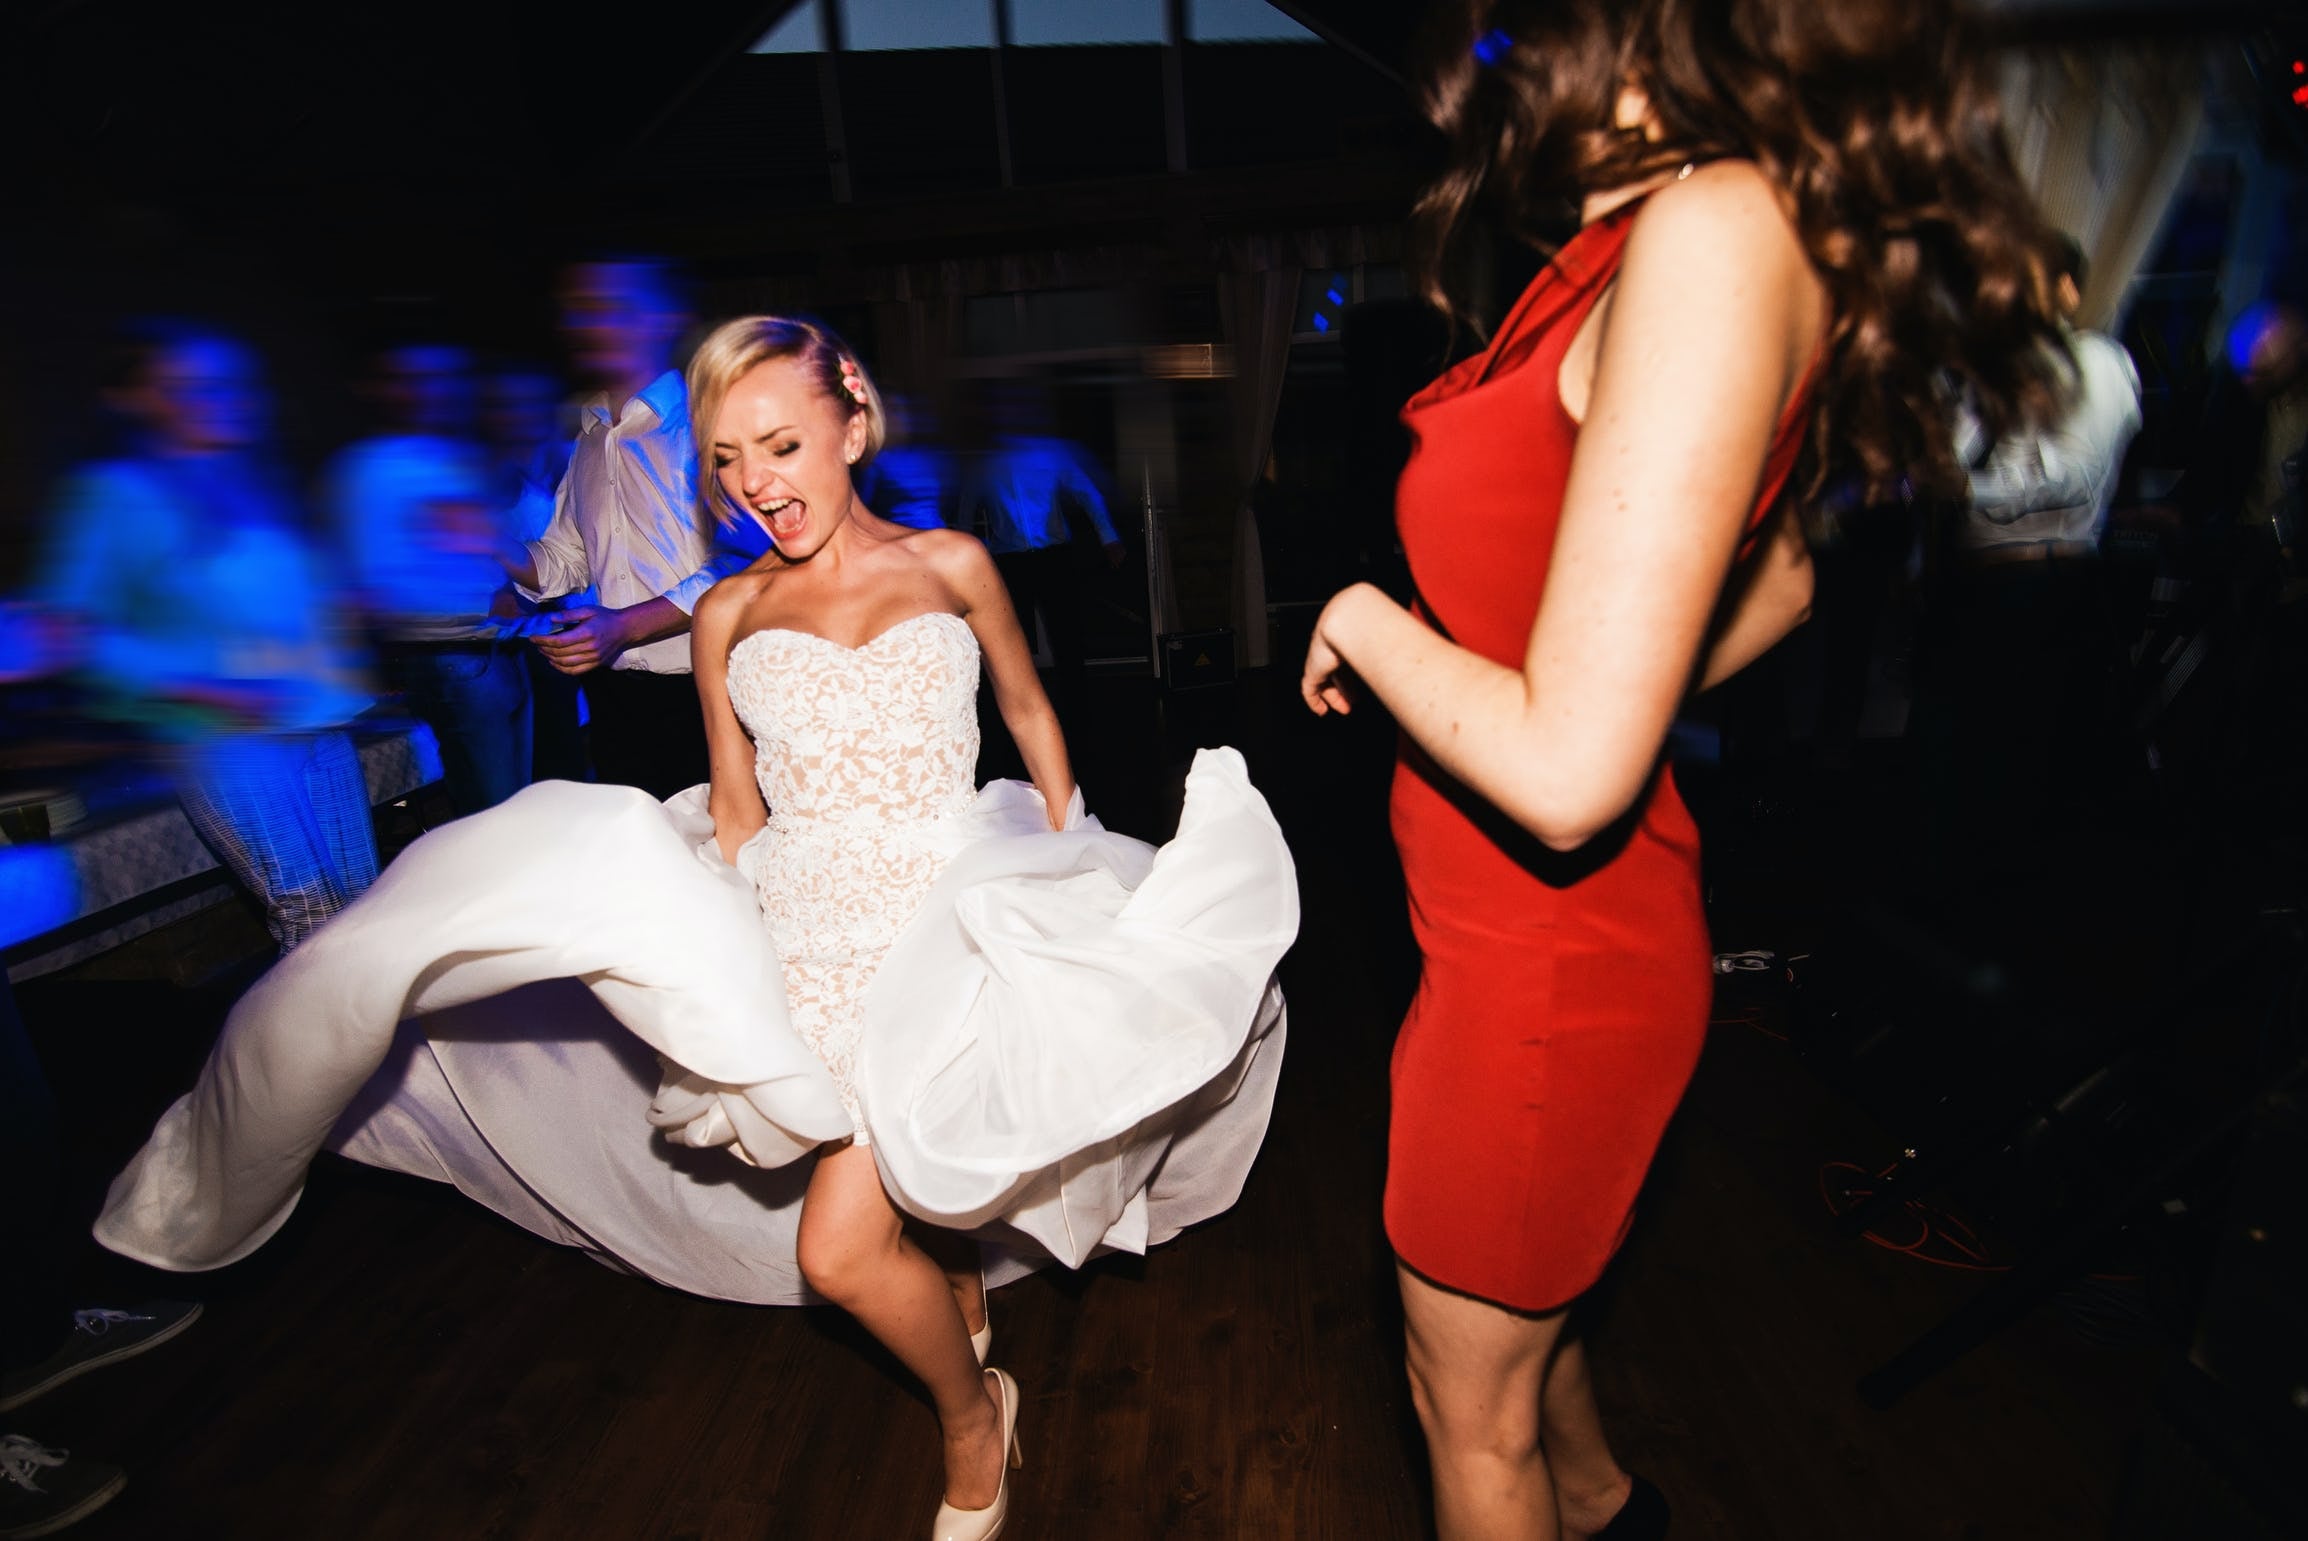 20 Songs Guaranteed To Fill The Dance Floor At Your Wedding Reception!  #weddingmusic #function…